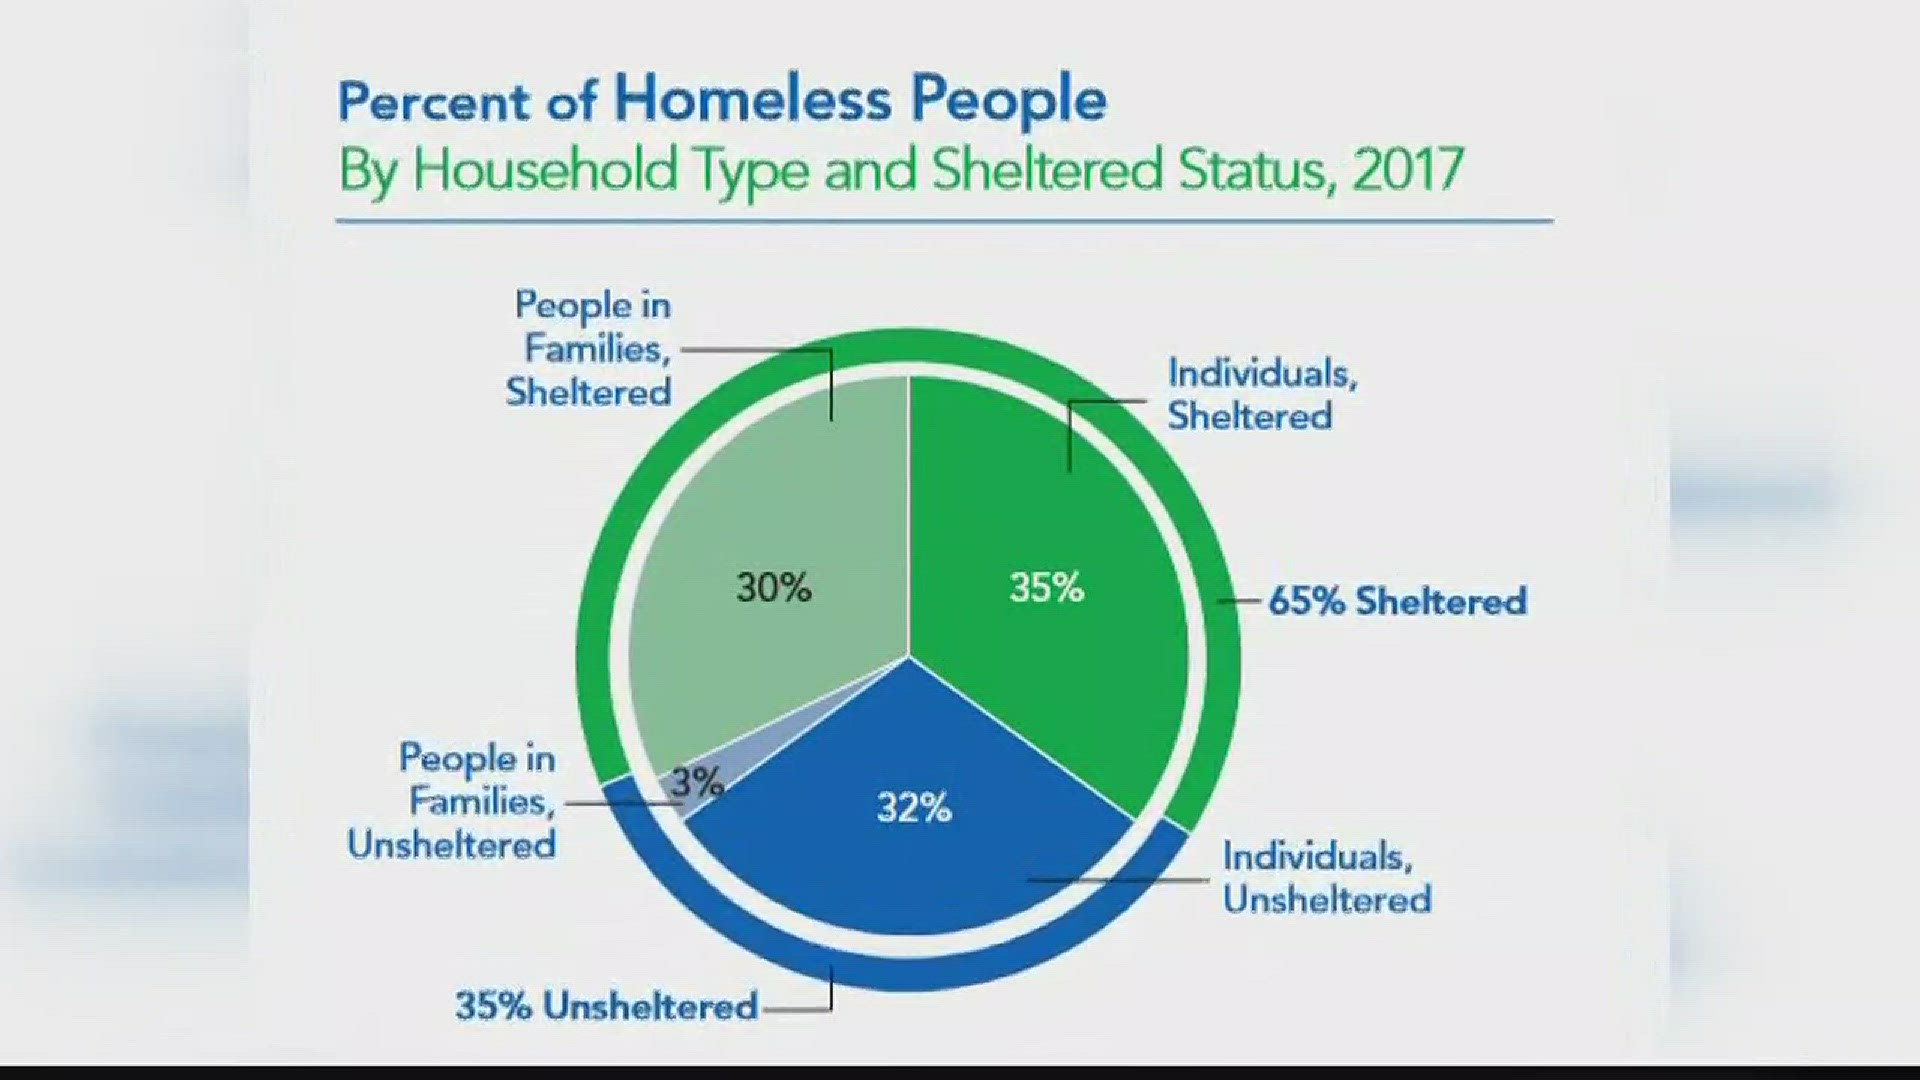 A lack of low income housing is believed to be the blame for the rise in homelessness.